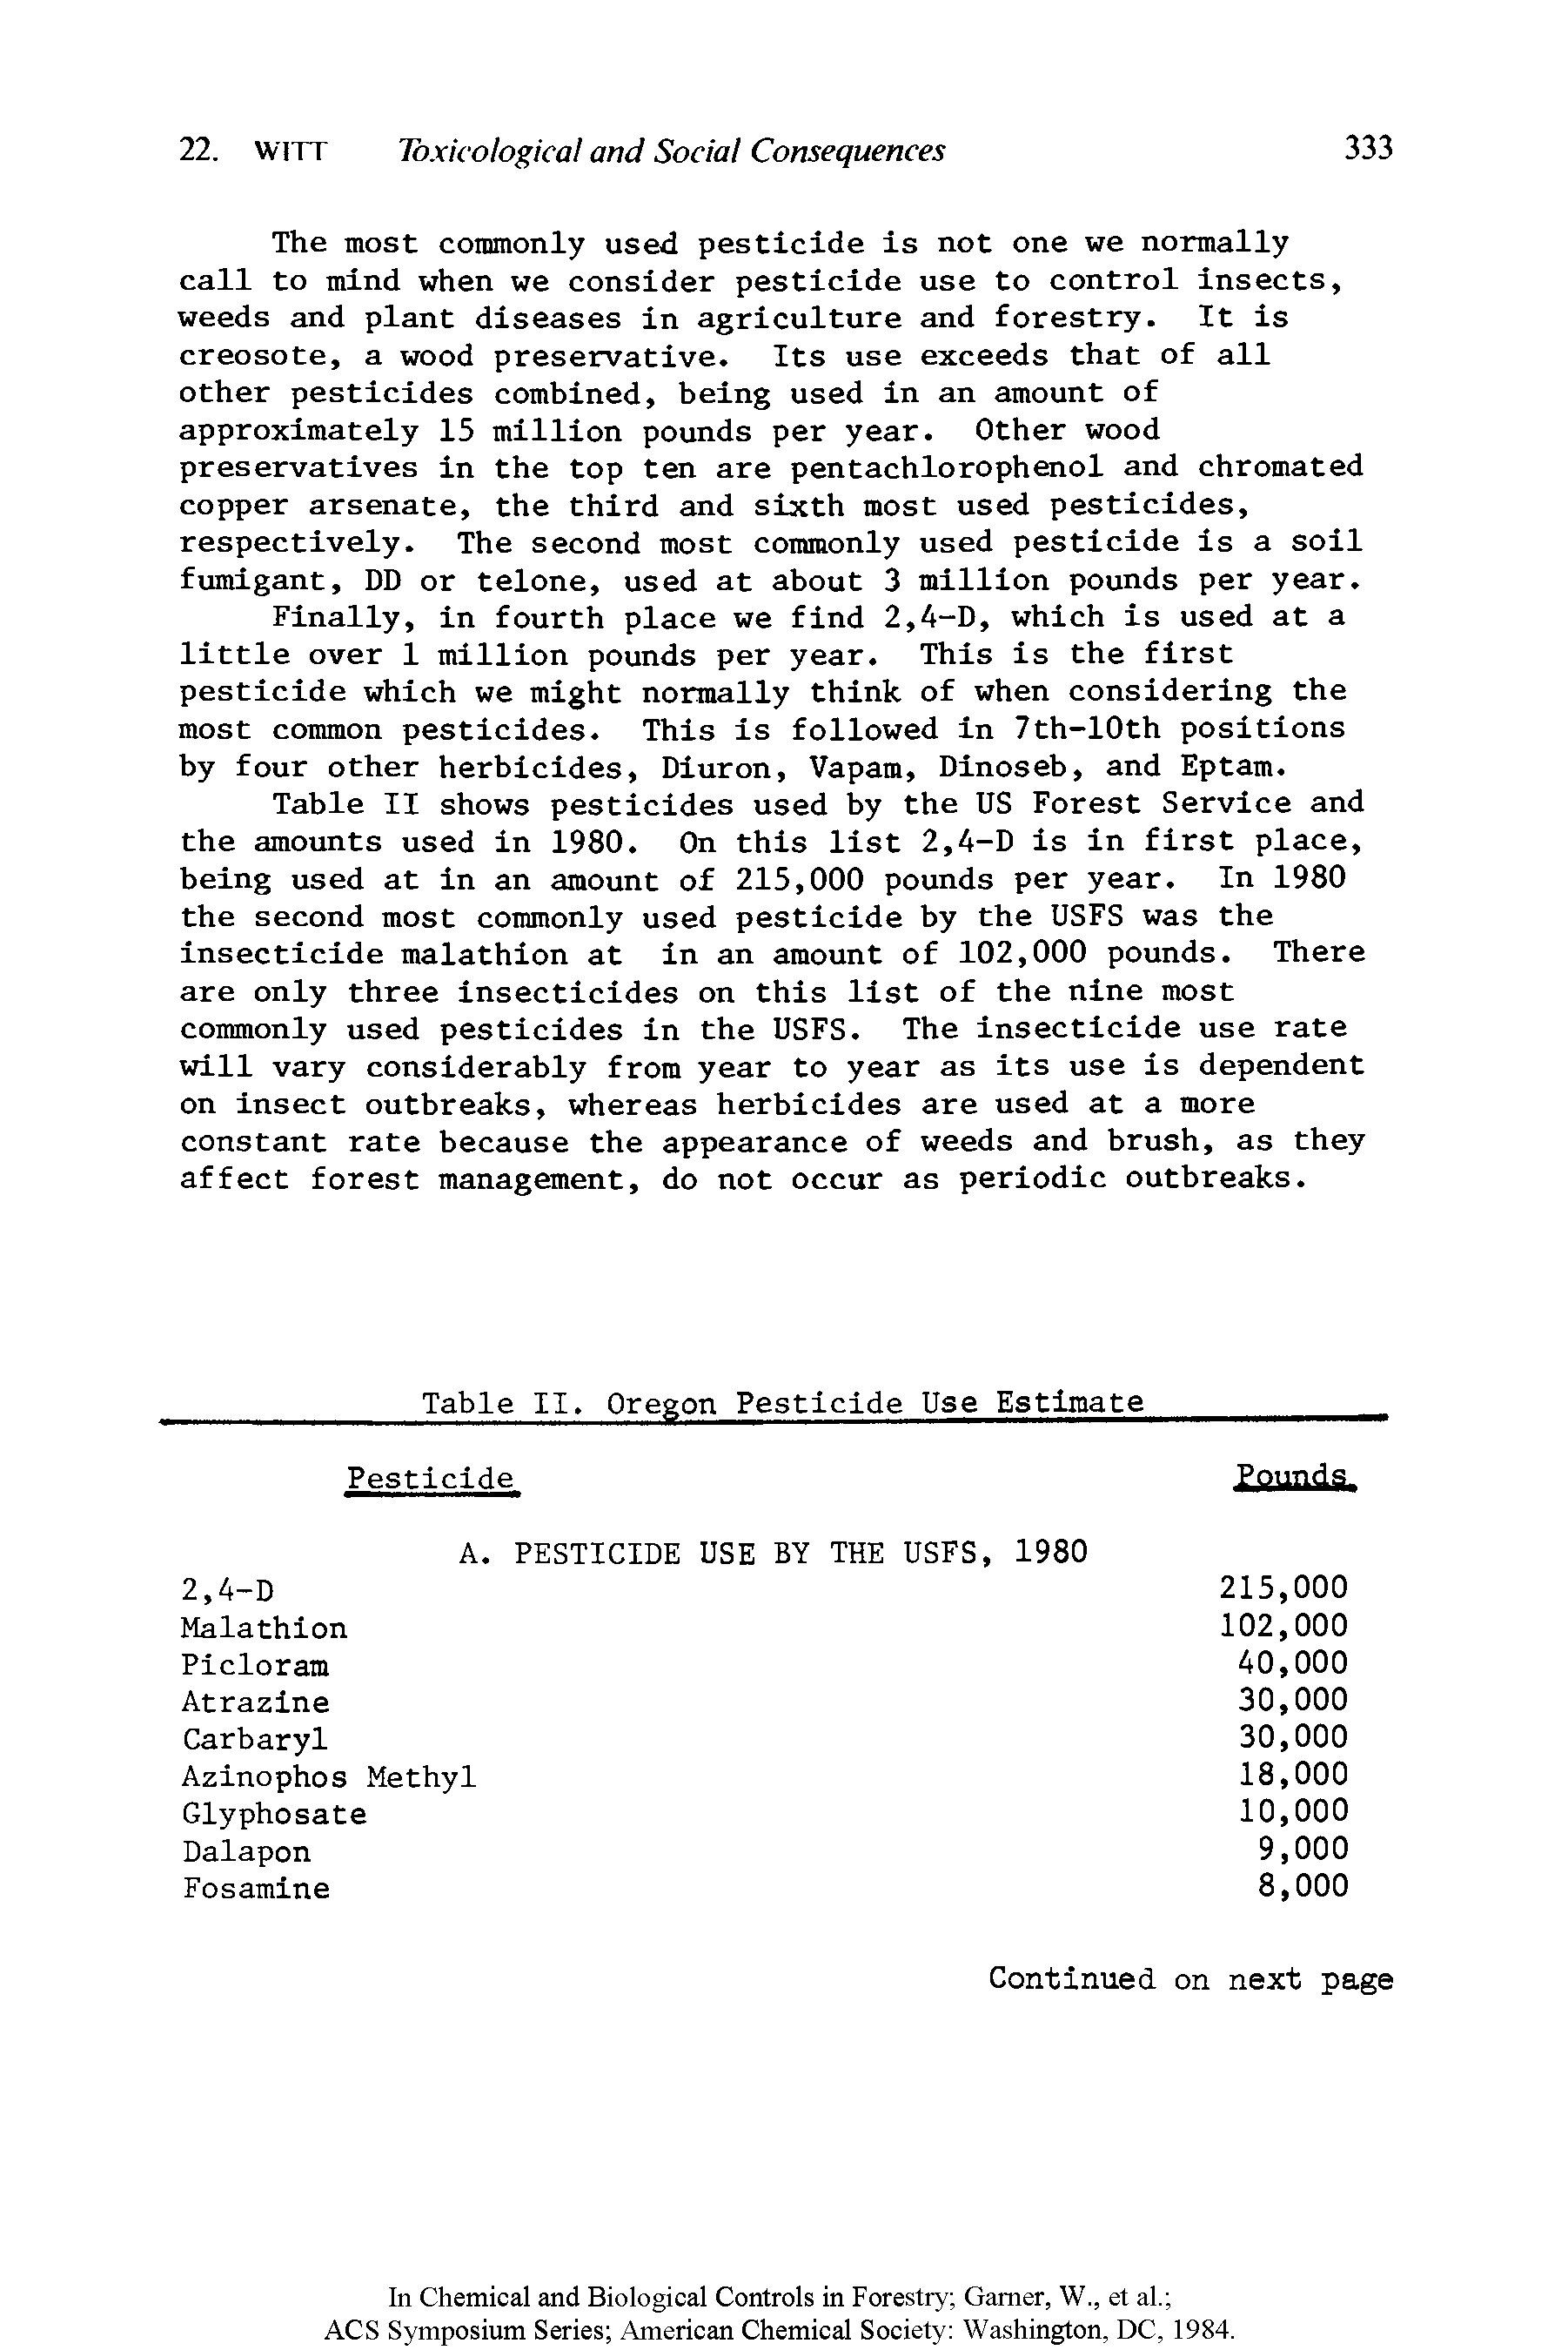 Table II shows pesticides used by the US Forest Service and the amounts used in 1980. On this list 2,4-D is in first place, being used at in an amount of 215,000 pounds per year. In 1980 the second most commonly used pesticide by the USFS was the insecticide malathion at in an amount of 102,000 pounds. There are only three insecticides on this list of the nine most commonly used pesticides in the USFS. The insecticide use rate will vary considerably from year to year as its use is dependent on insect outbreaks, whereas herbicides are used at a more constant rate because the appearance of weeds and brush, as they affect forest management, do not occur as periodic outbreaks.